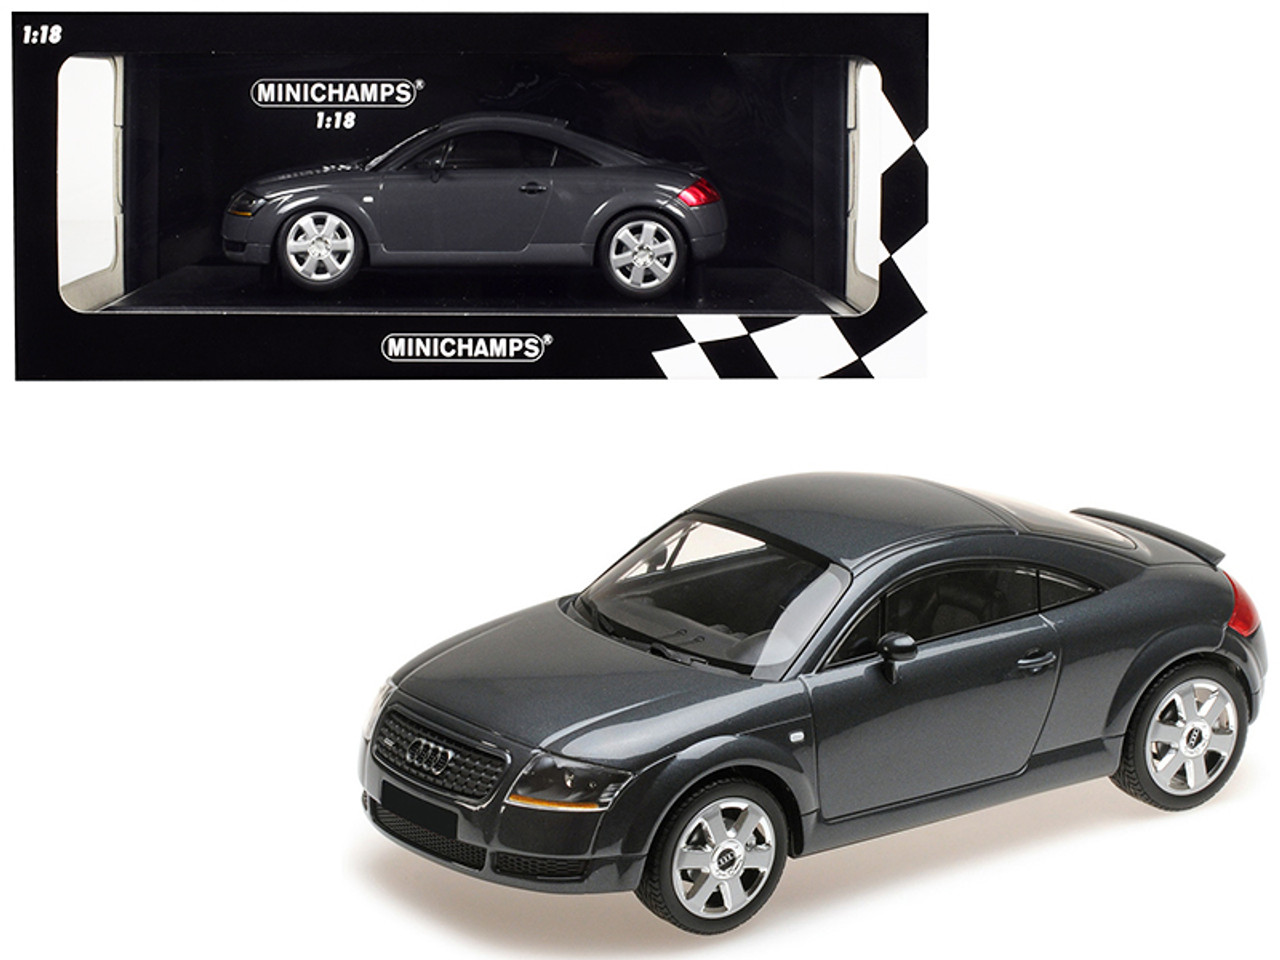 1/18 Minichamps 1998 Audi TT Coupe Grey Limited Edition to 300 pieces Worldwide Diecast Car Model